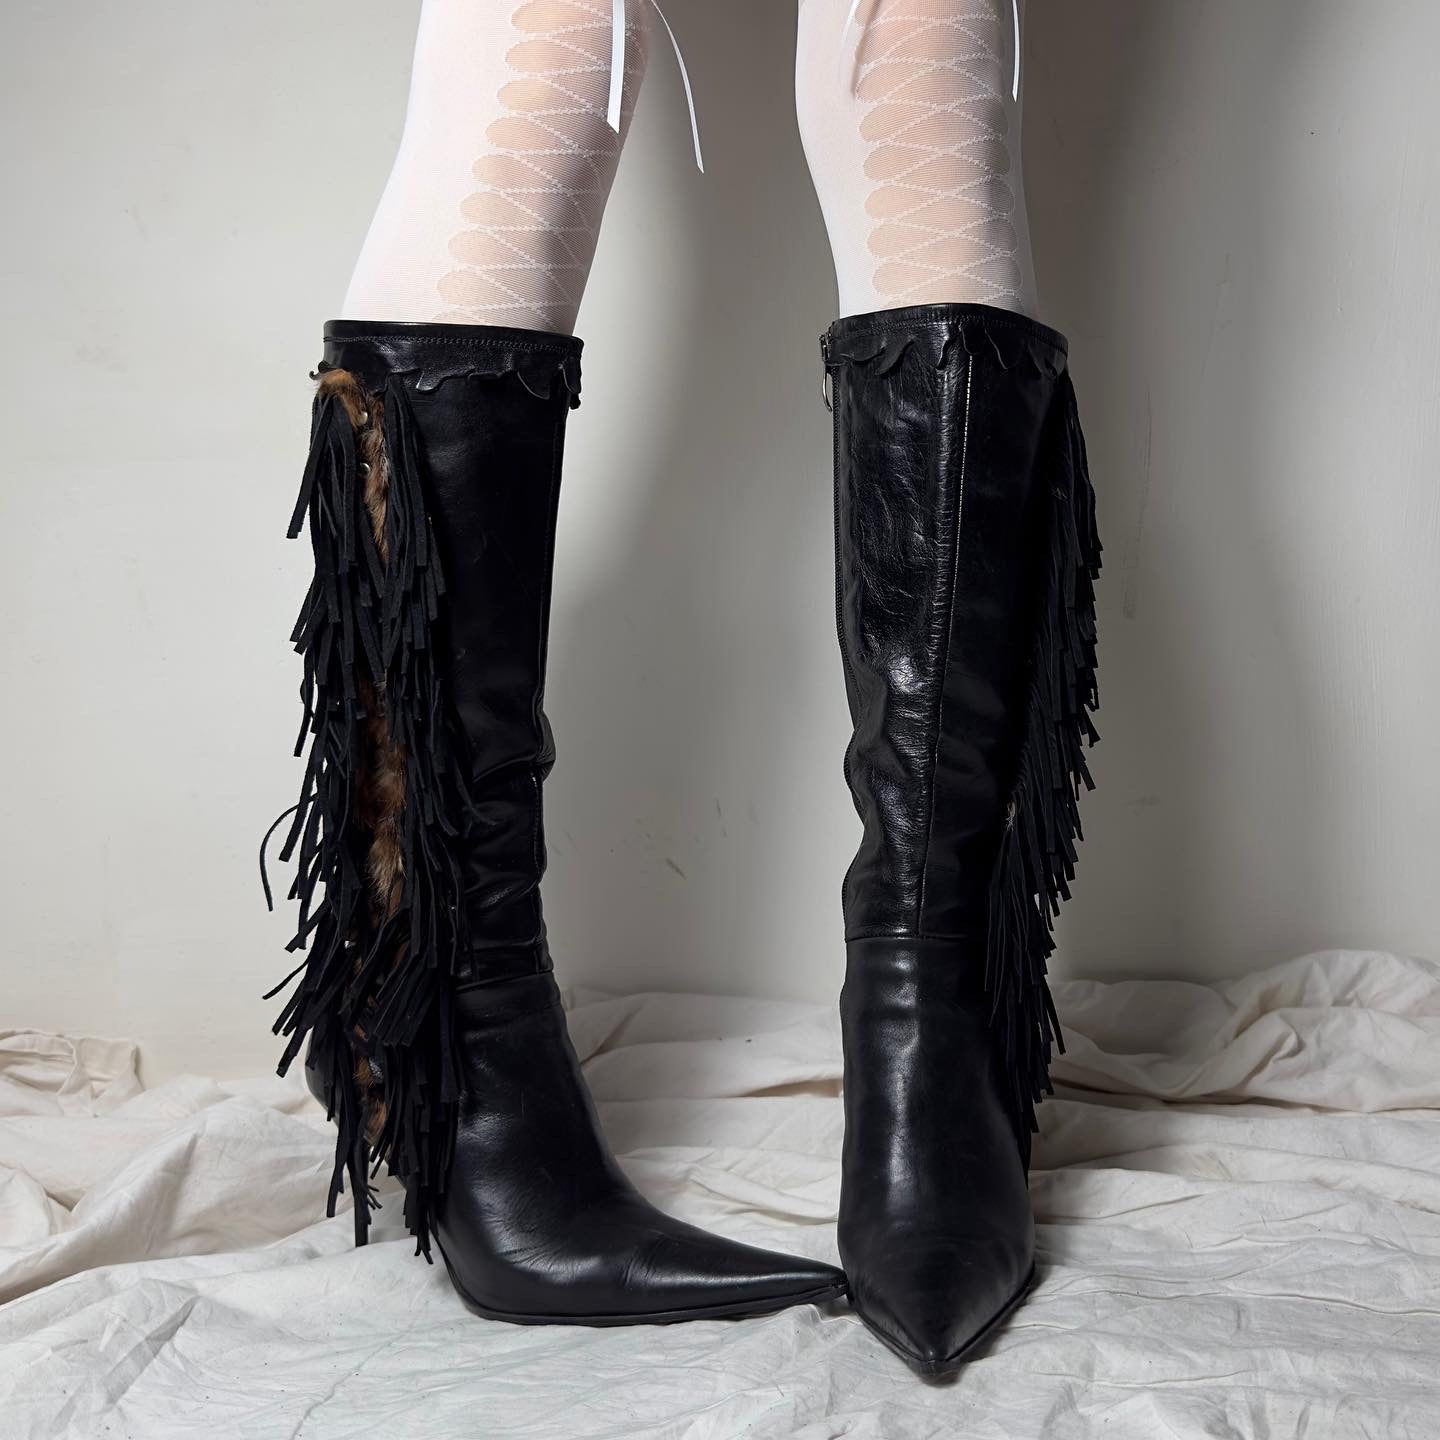 El Dante’s Pointy Toe Leather Boots 36/37